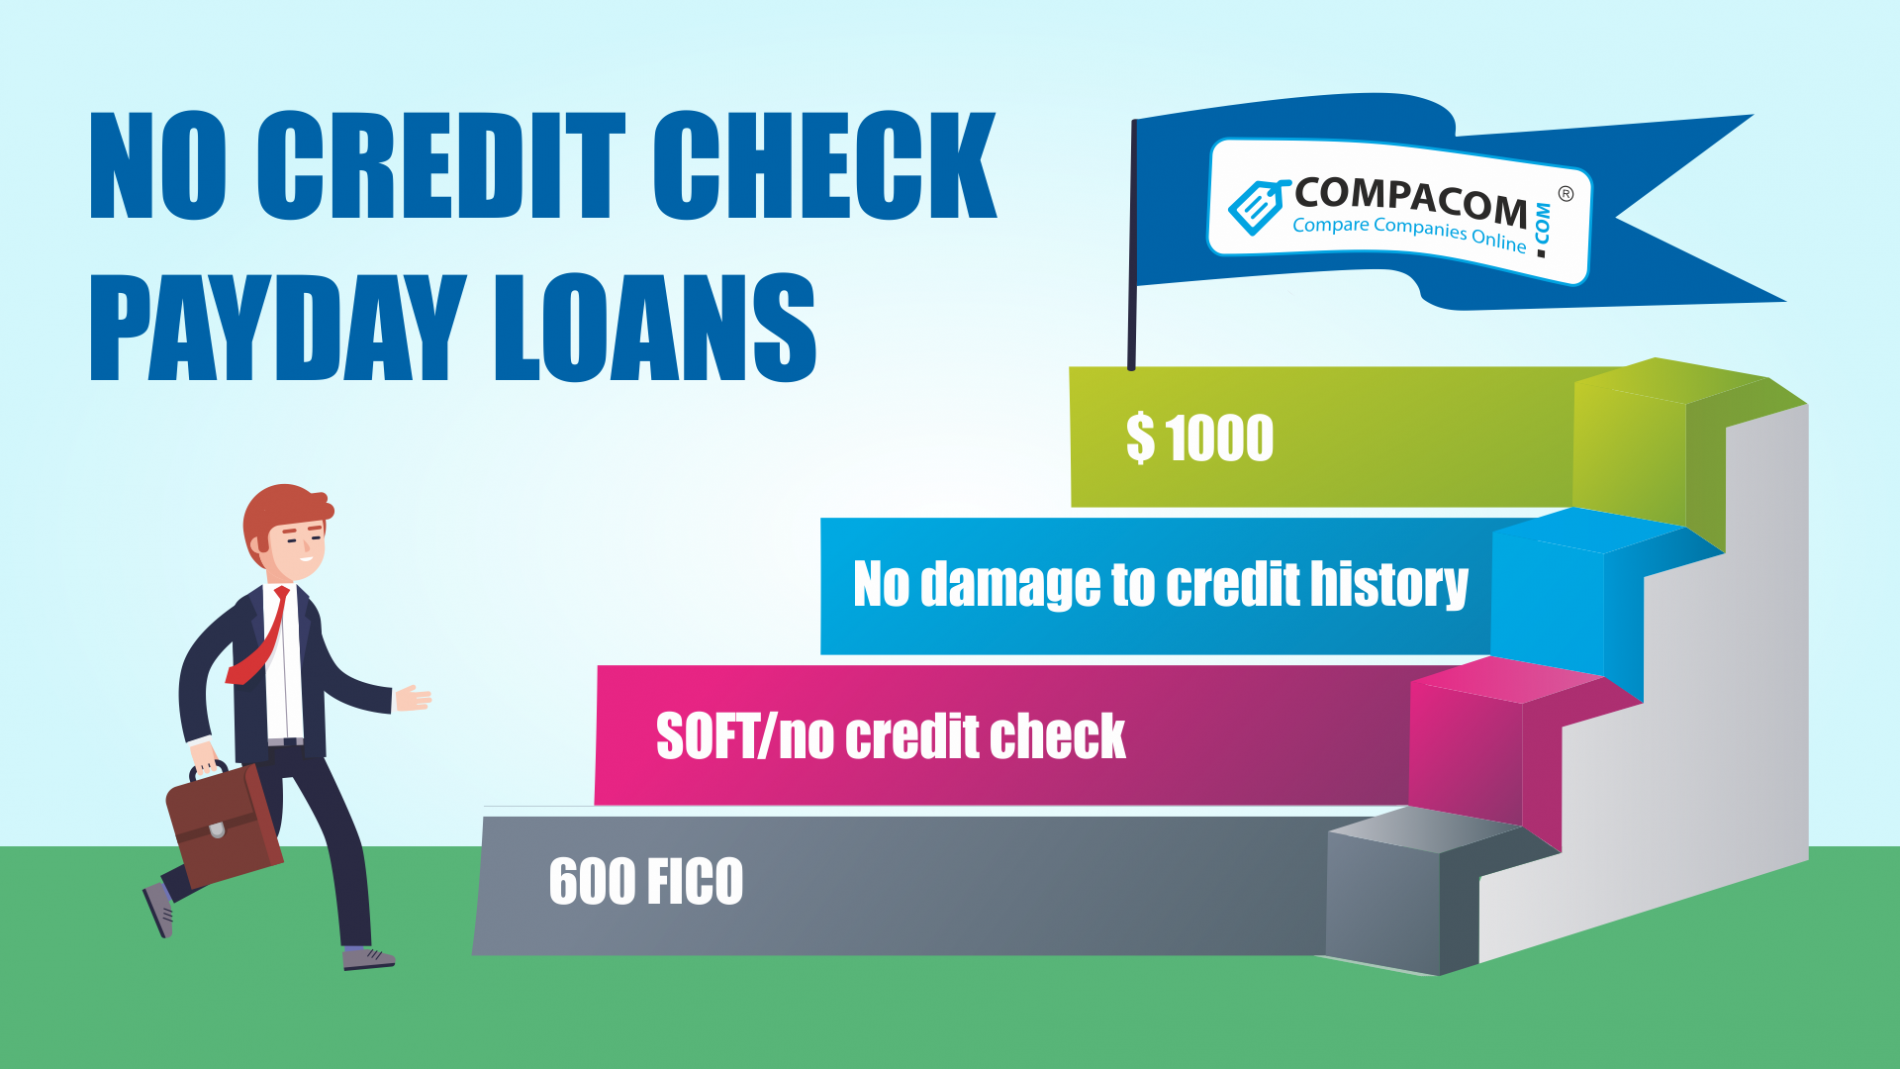 Unsecured Personal Loans For Bad Credit Not Payday Loans / Loanconnect